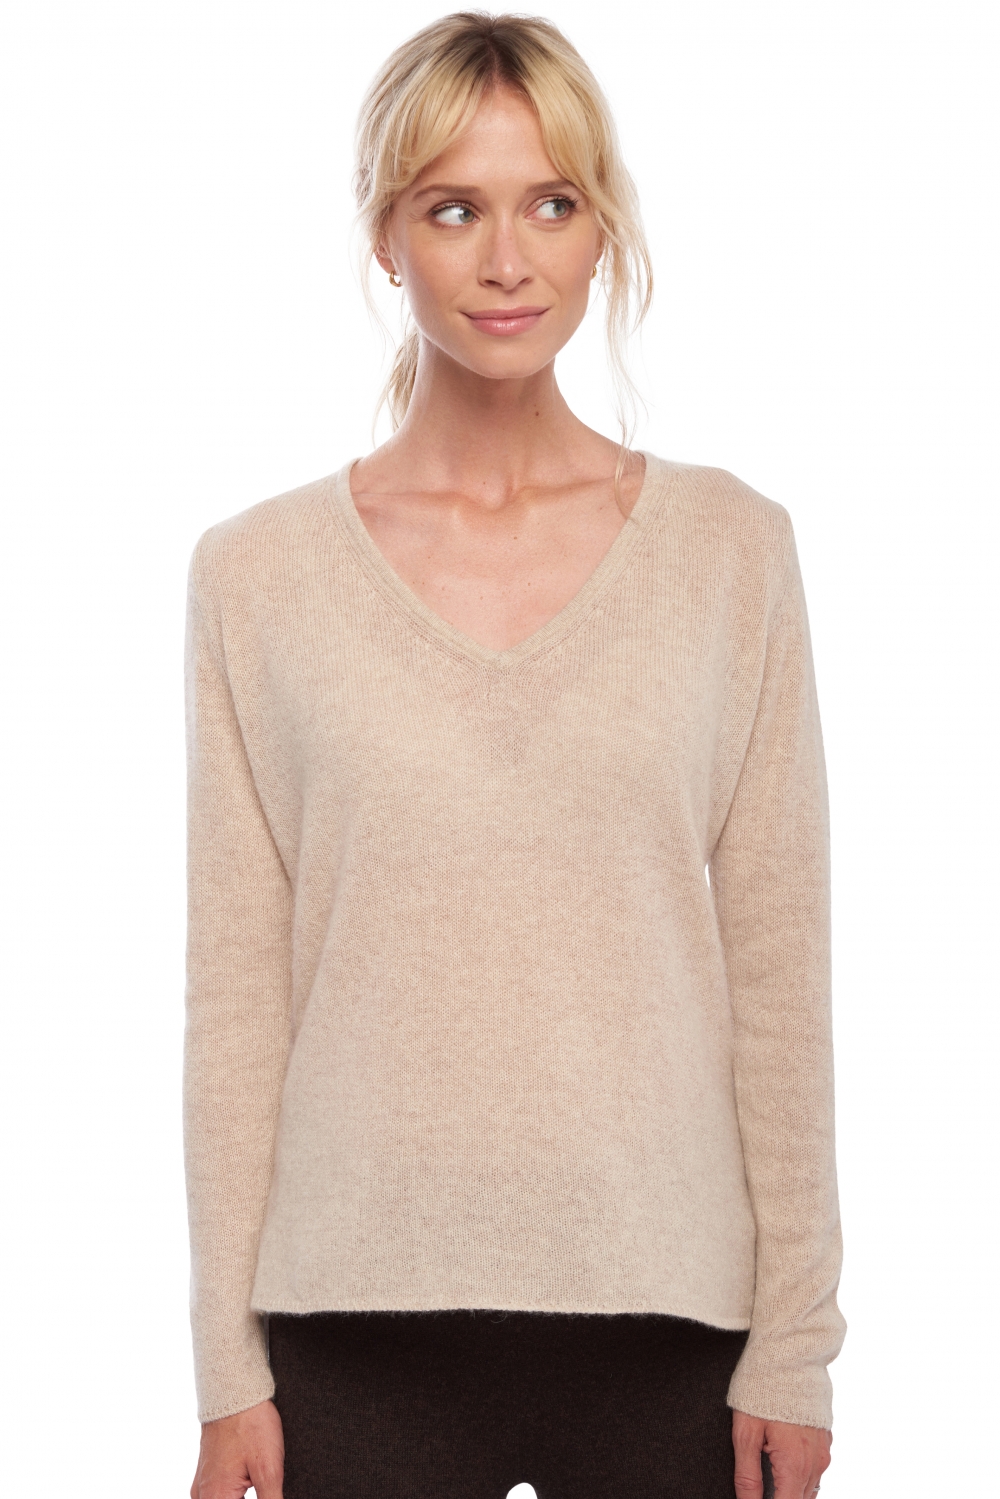 Cashmere ladies basic sweaters at low prices flavie natural beige l